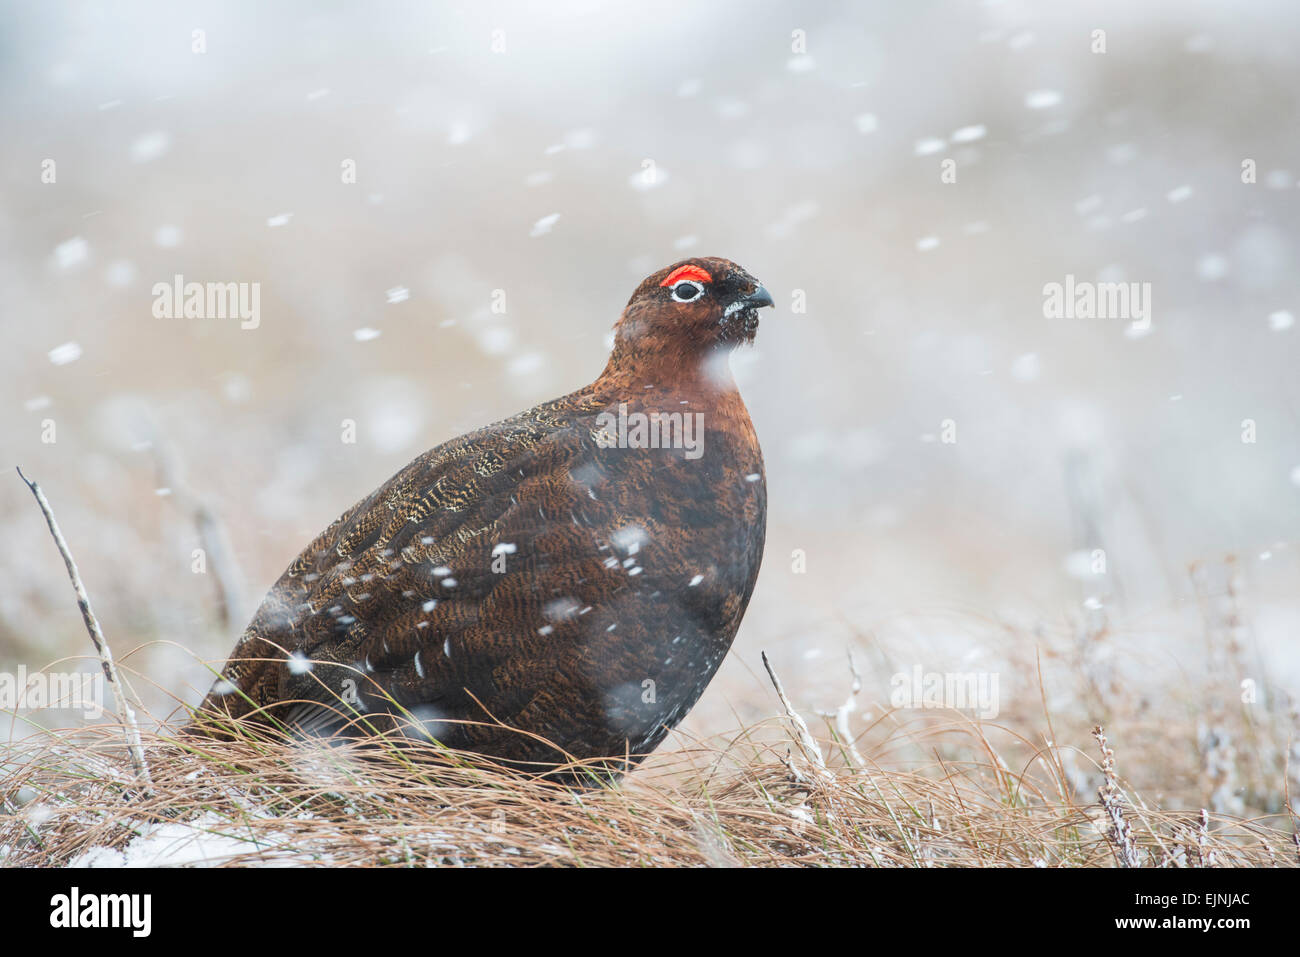 Red grouse (Lagopus lagopus scotica). The Scottish race of the willow grouse. Adult male photographed during a snow storm. Stock Photo